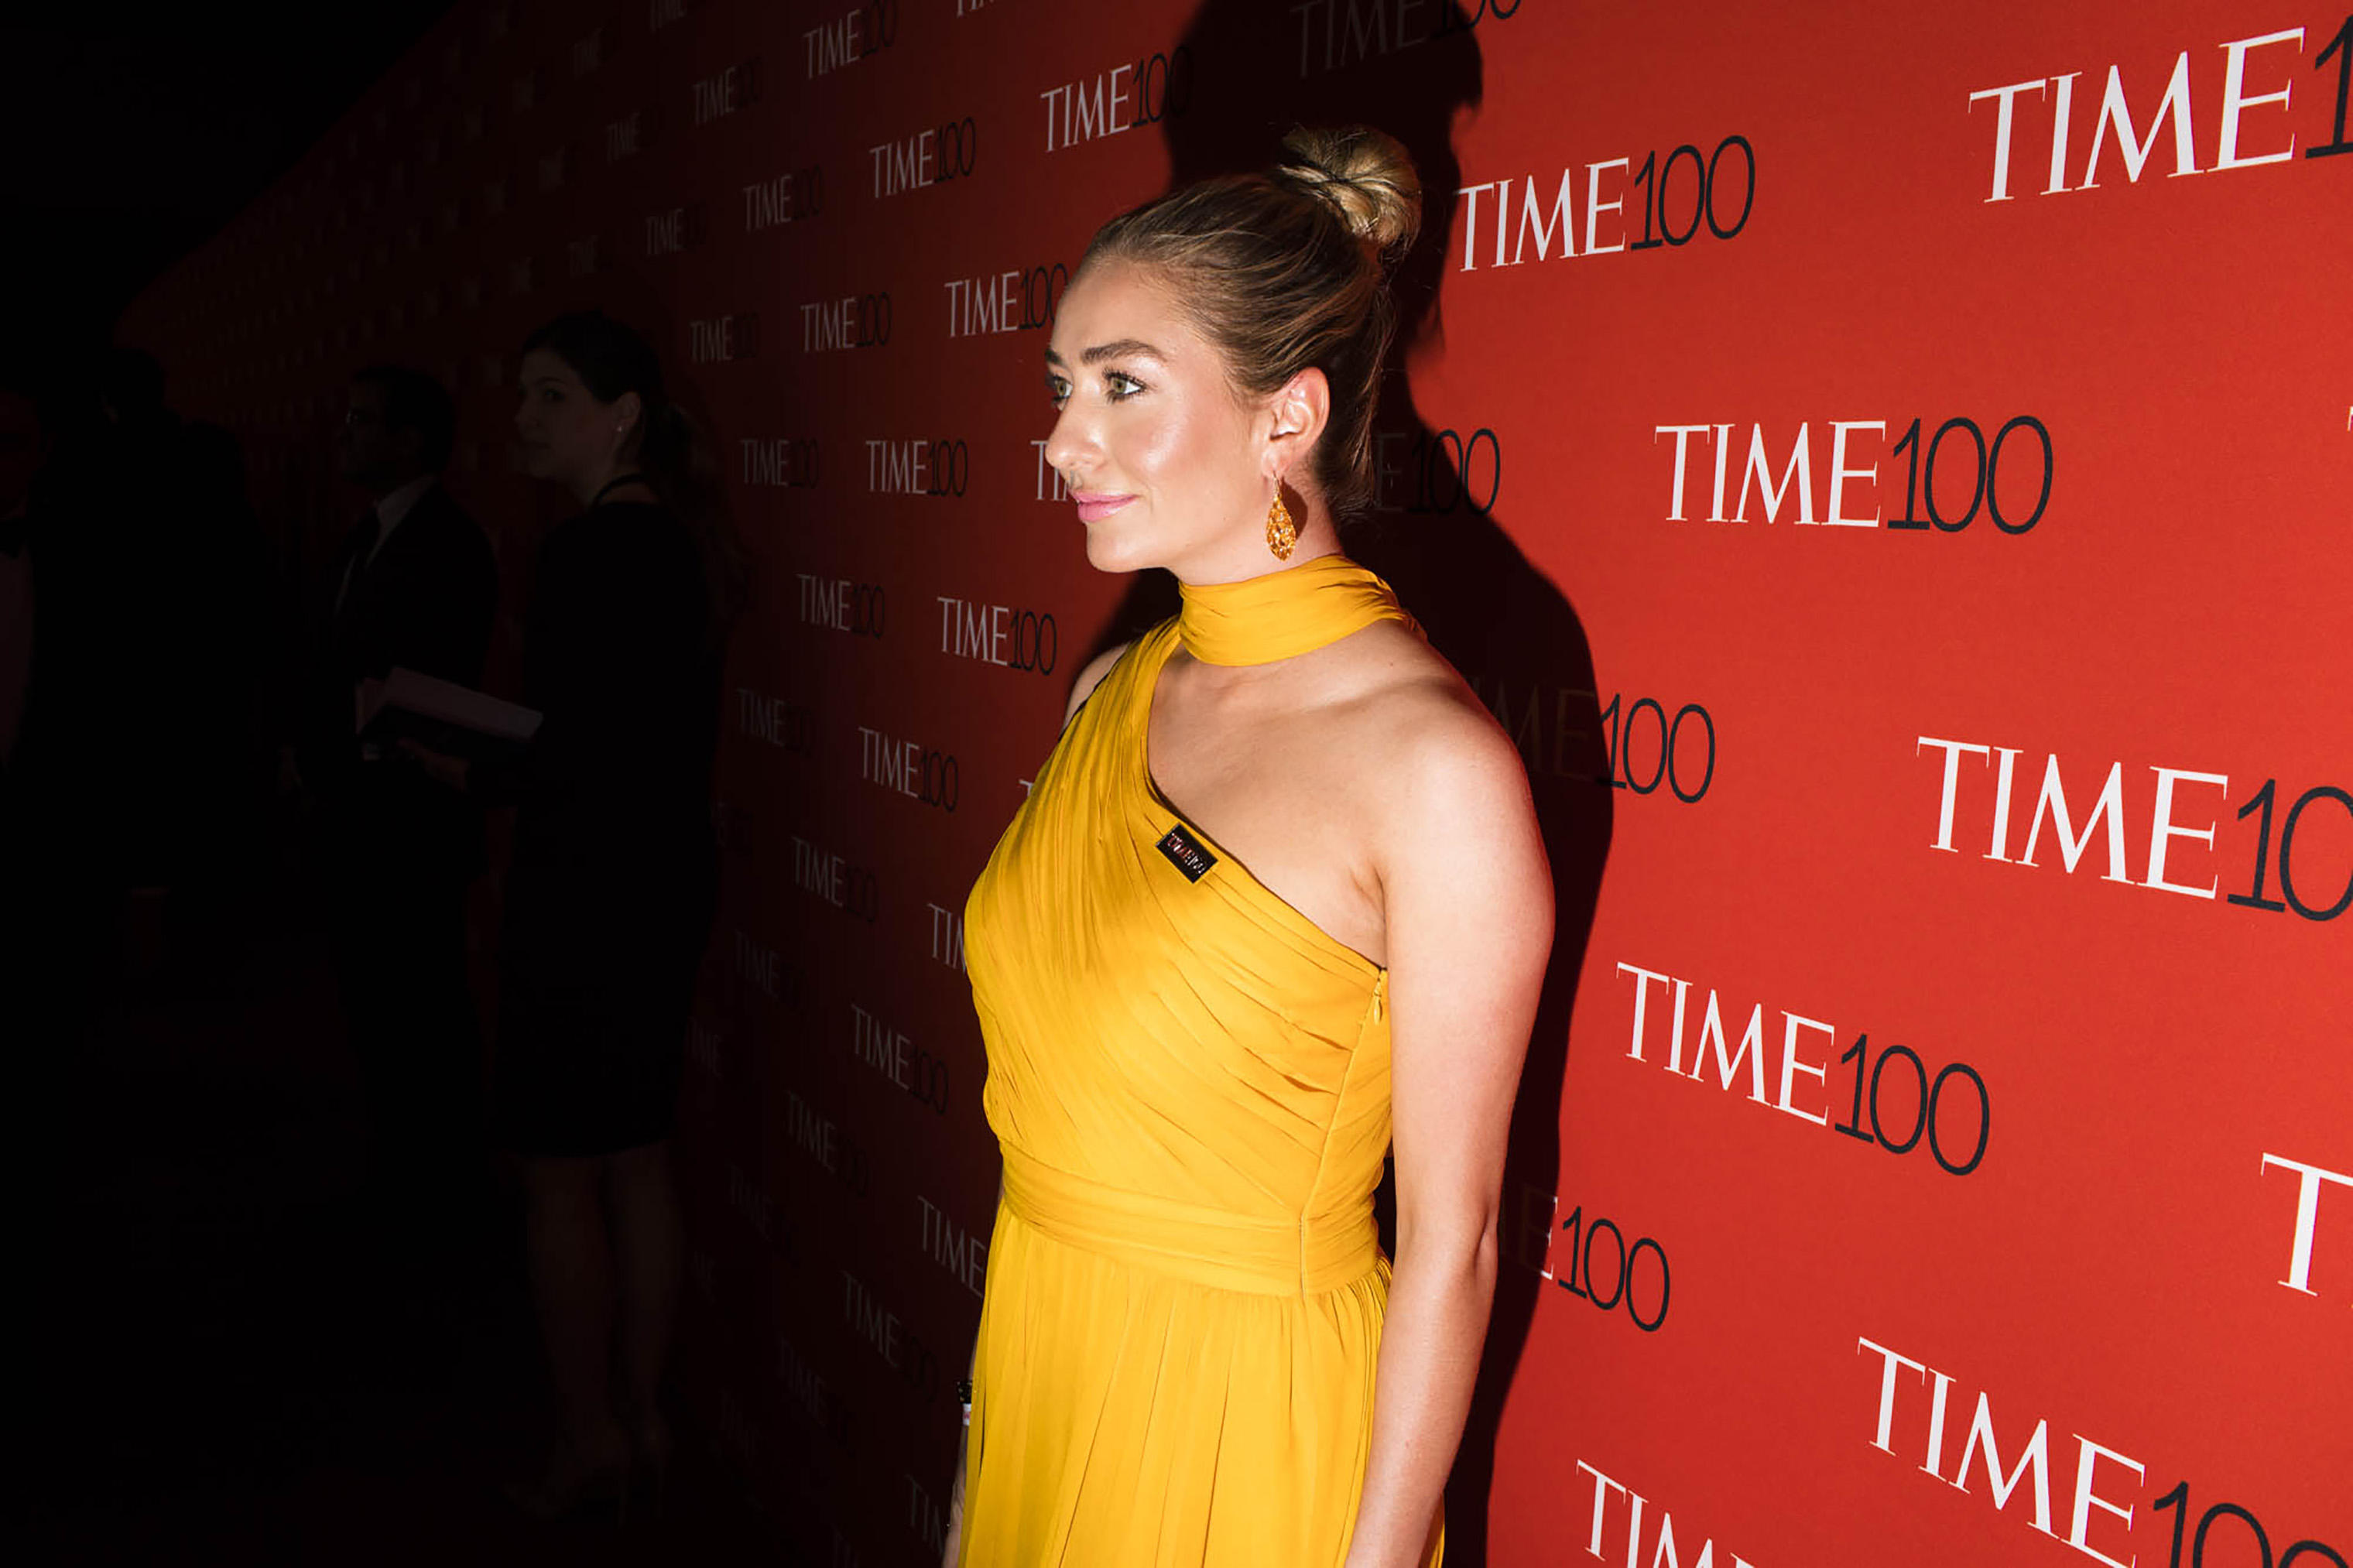 CEO of Bumble Whitney Wolfe Herd at the Time 100 Gala at Jazz at Lincoln Center on April 24, 2018 in New York City. (Landon Nordeman for TIME)